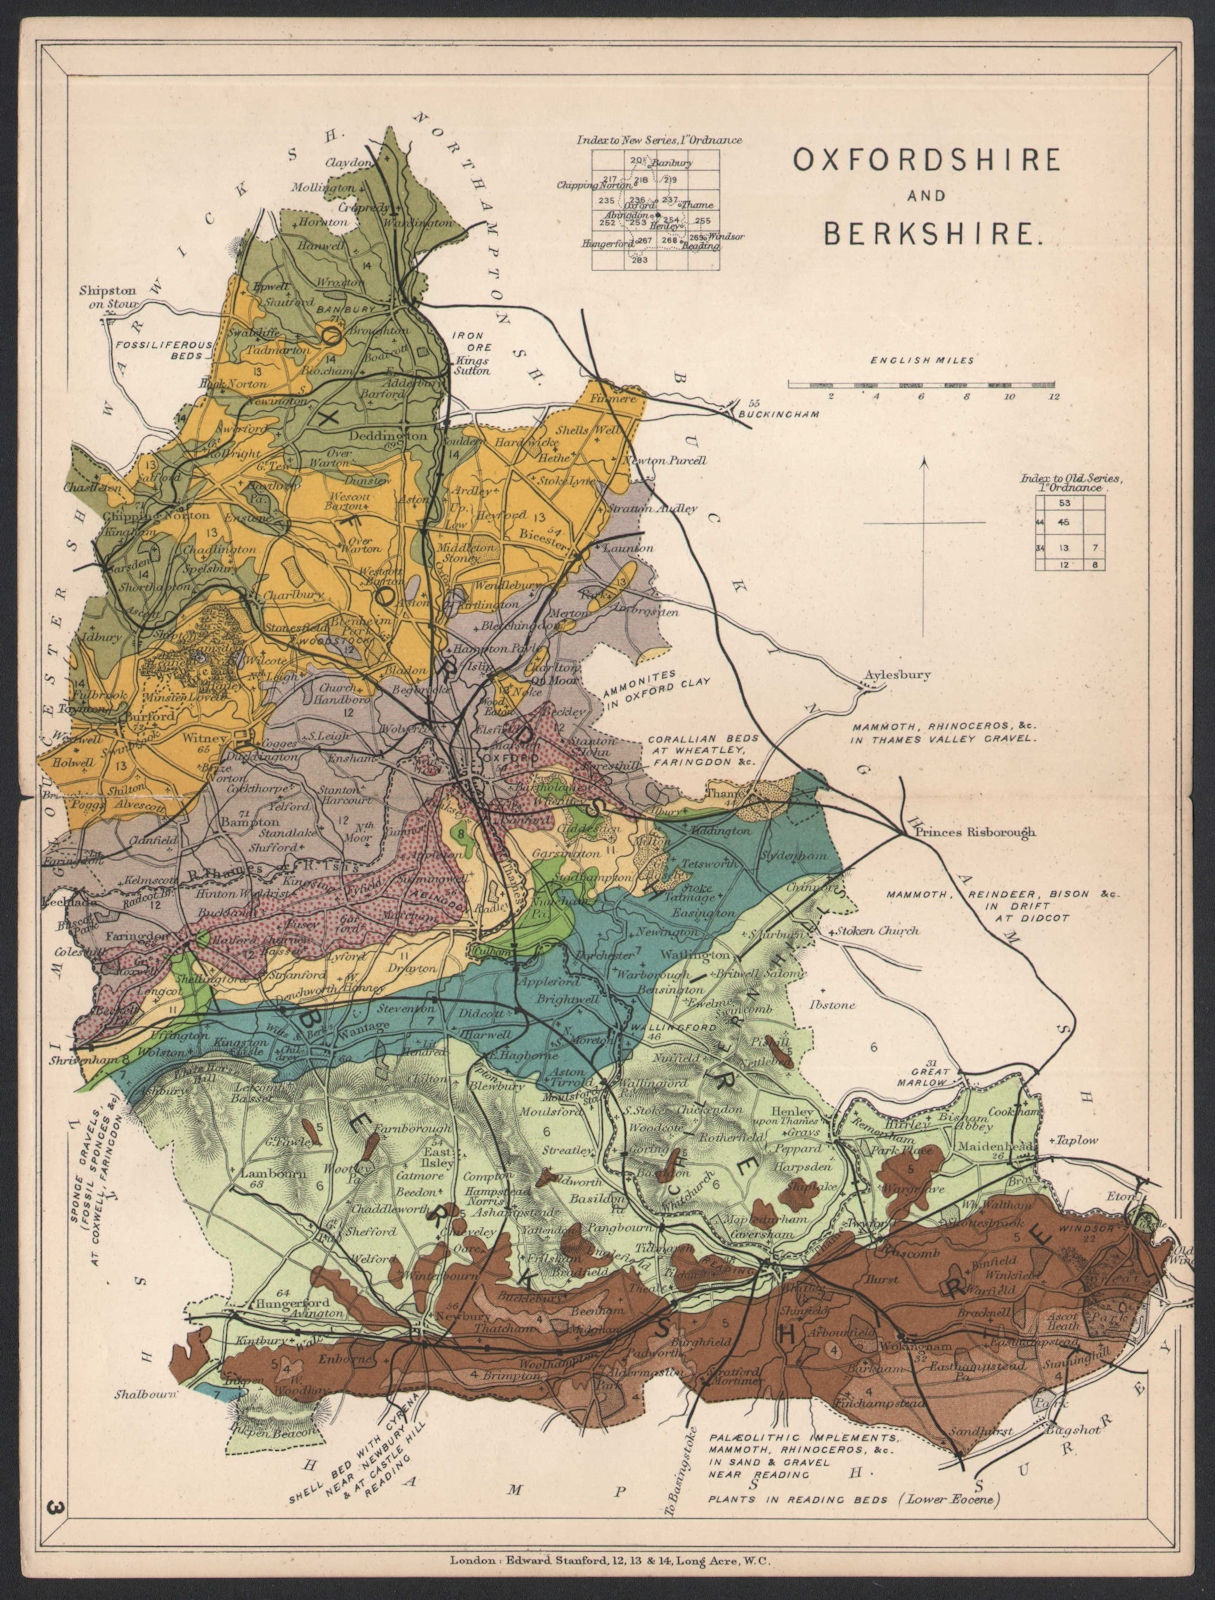 Associate Product OXFORDSHIRE AND BERKSHIRE Geological map. STANFORD 1907 old antique chart